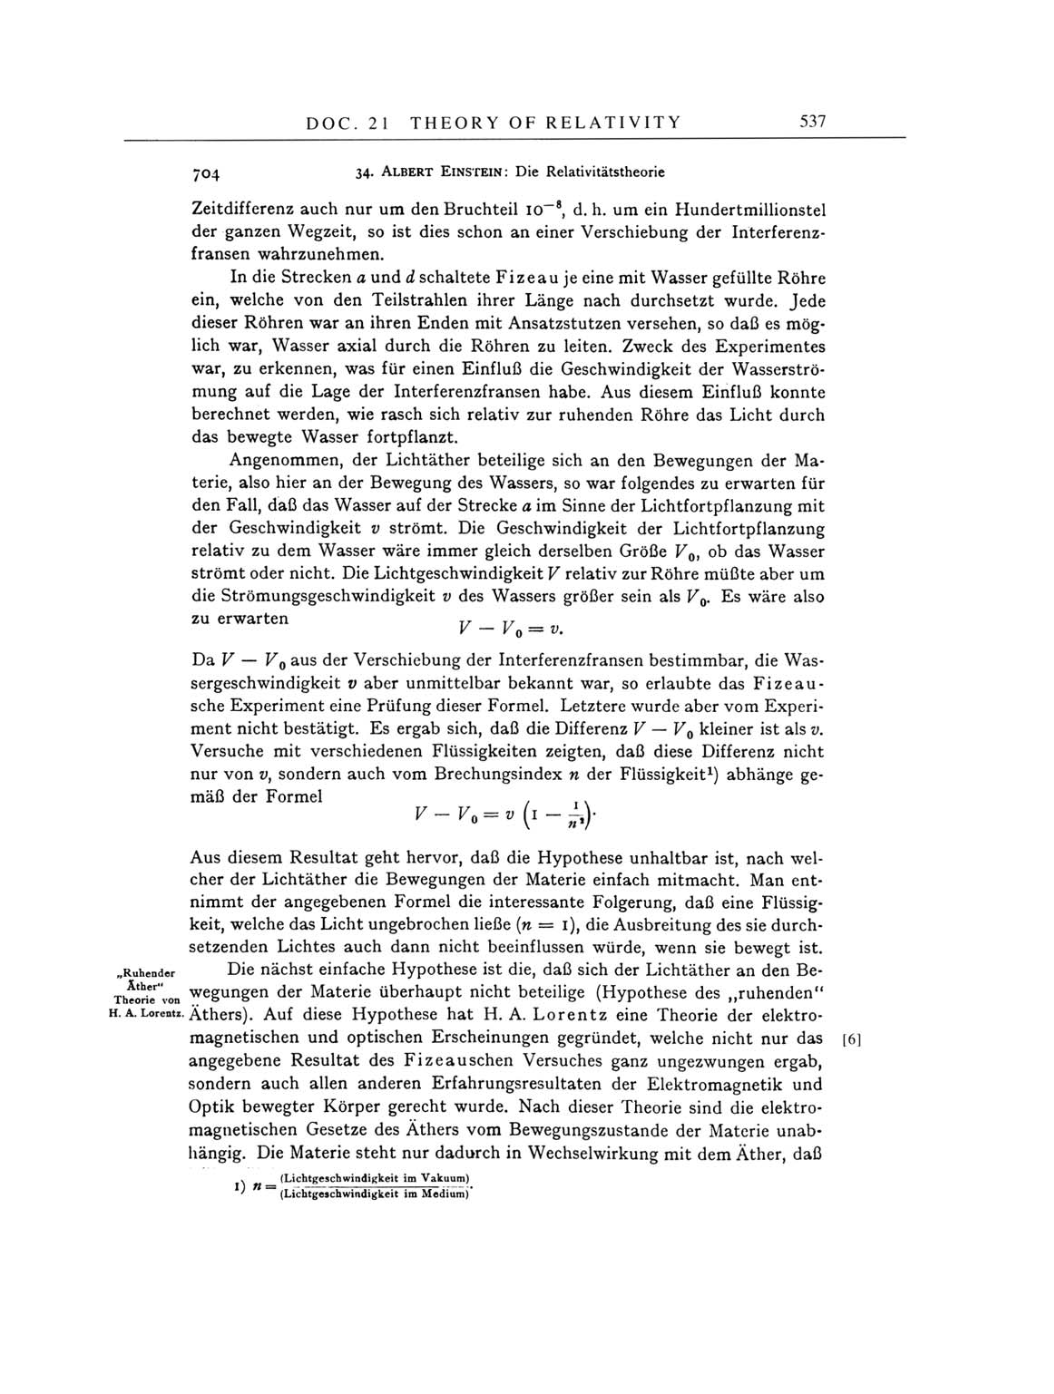 Volume 4: The Swiss Years: Writings 1912-1914 page 537